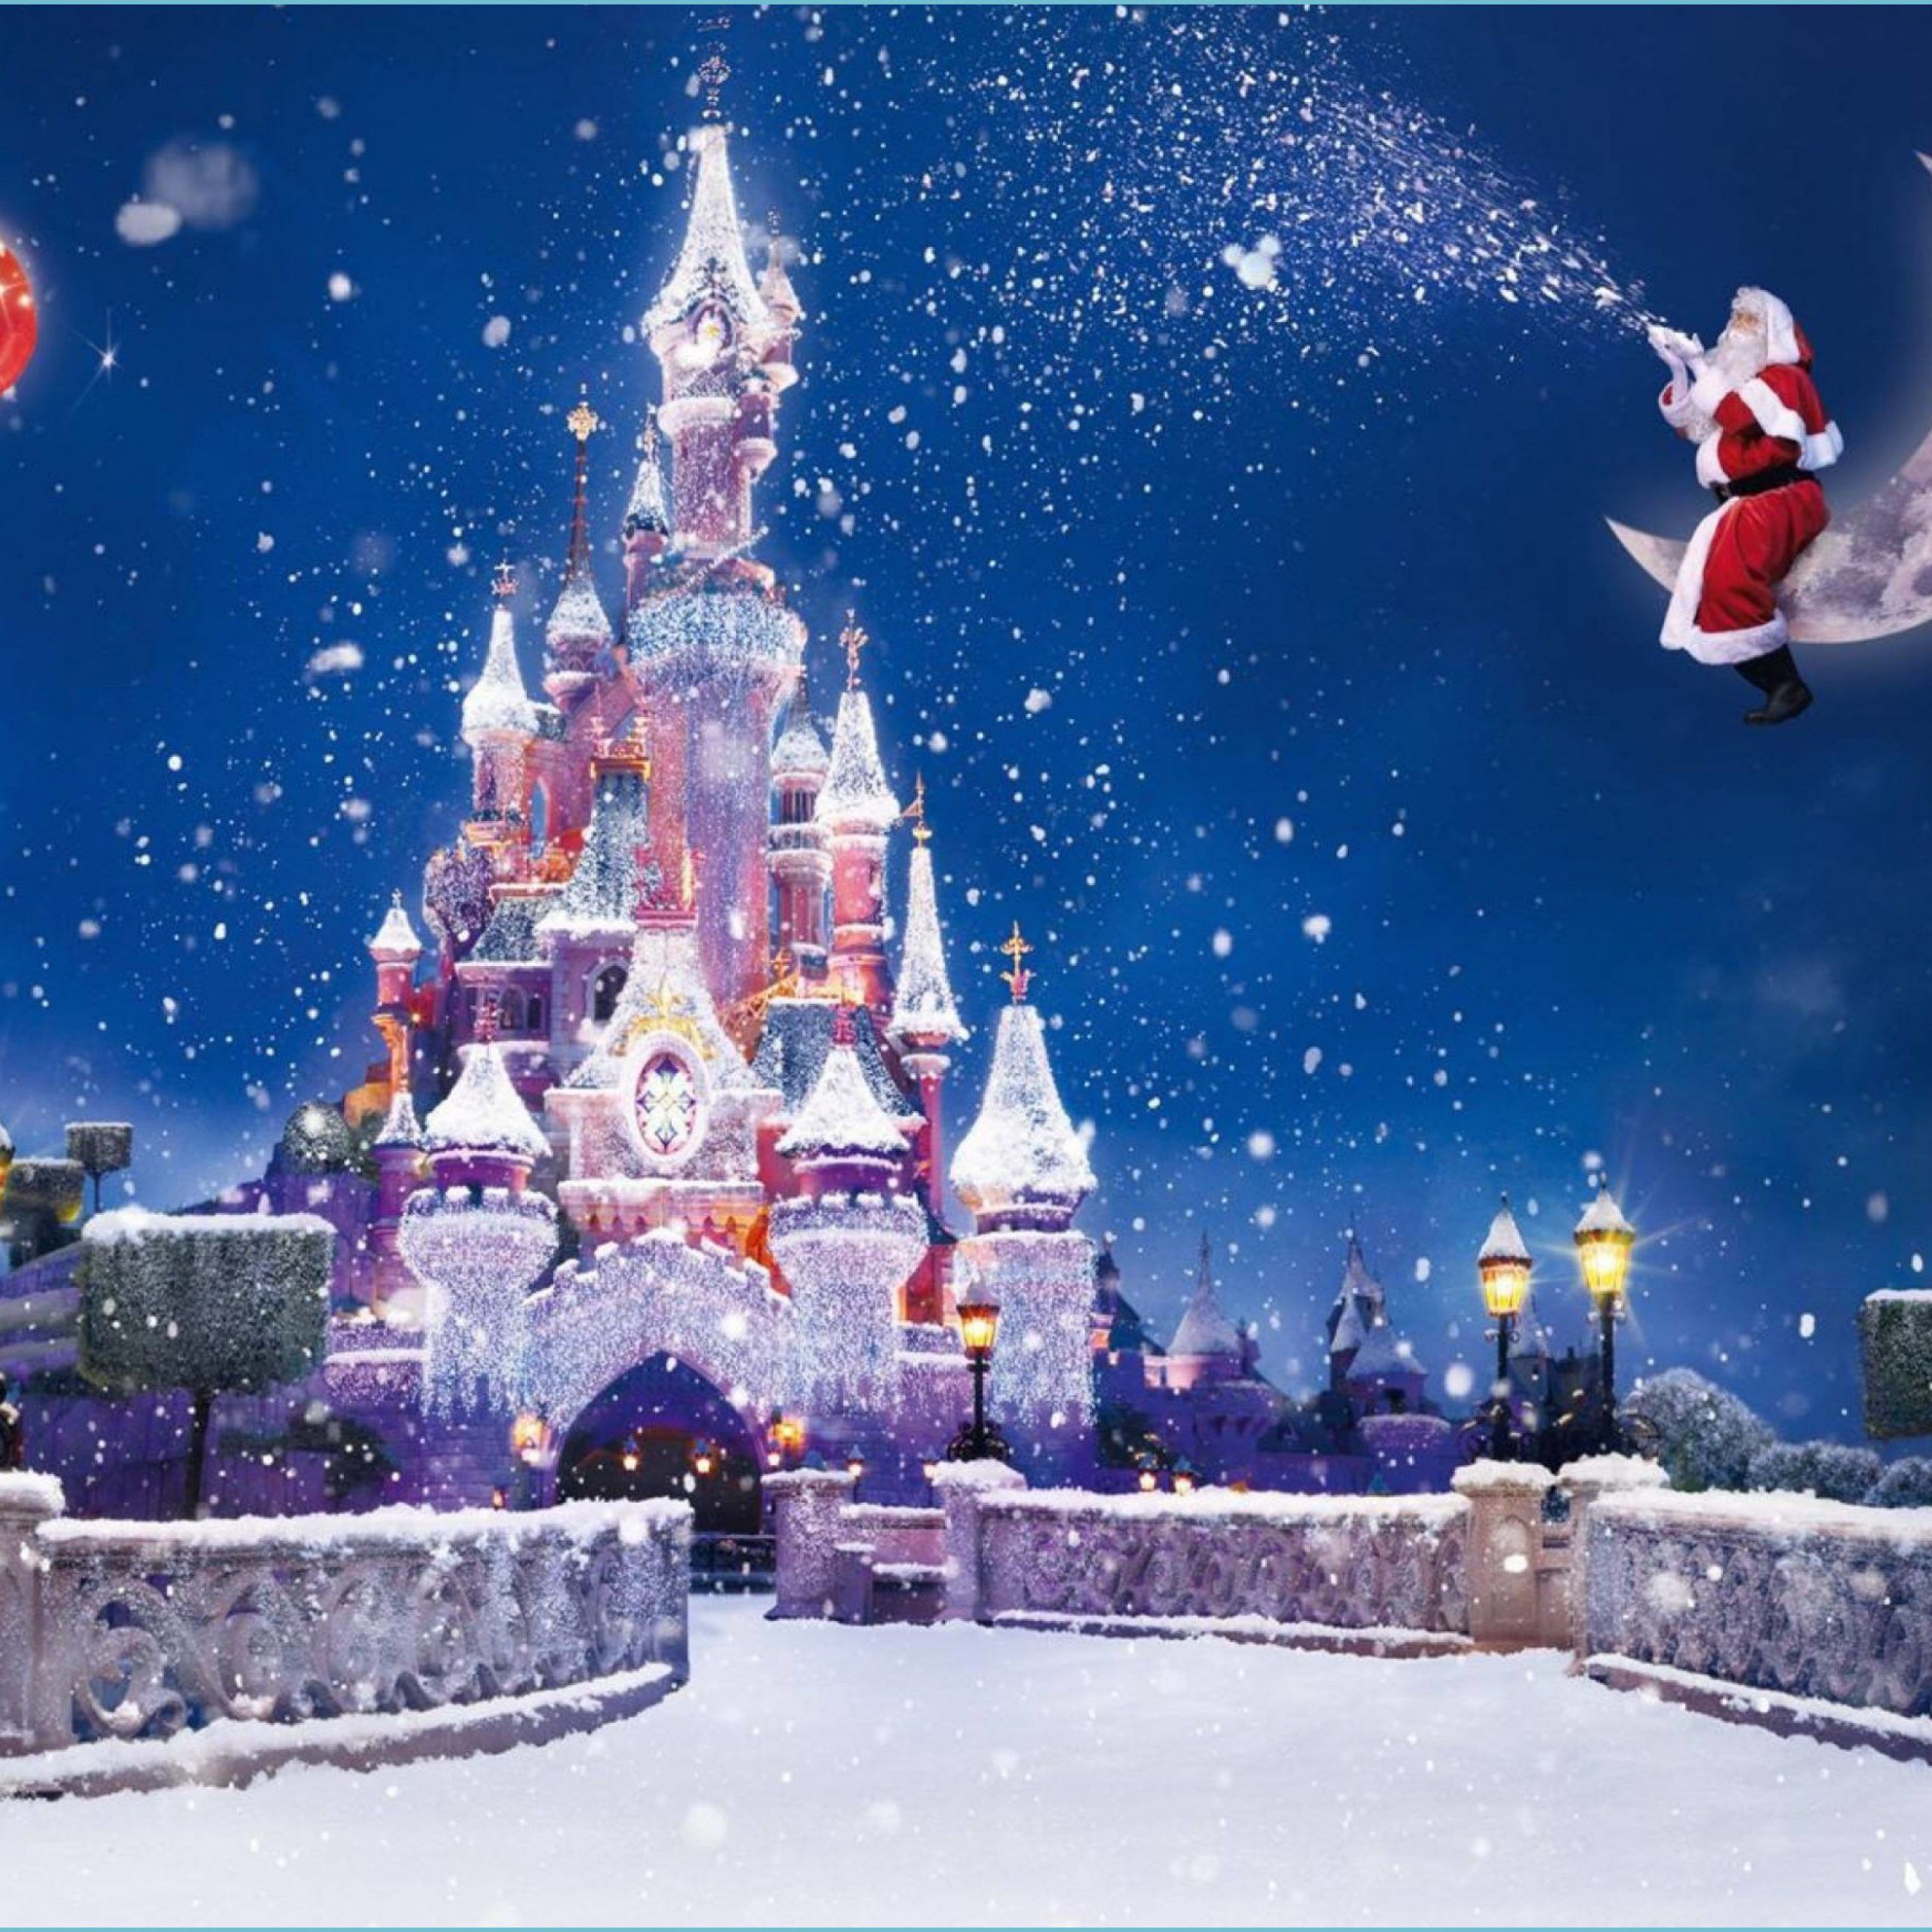 Disney Christmas Wallpaper Is So Famous, But Why?